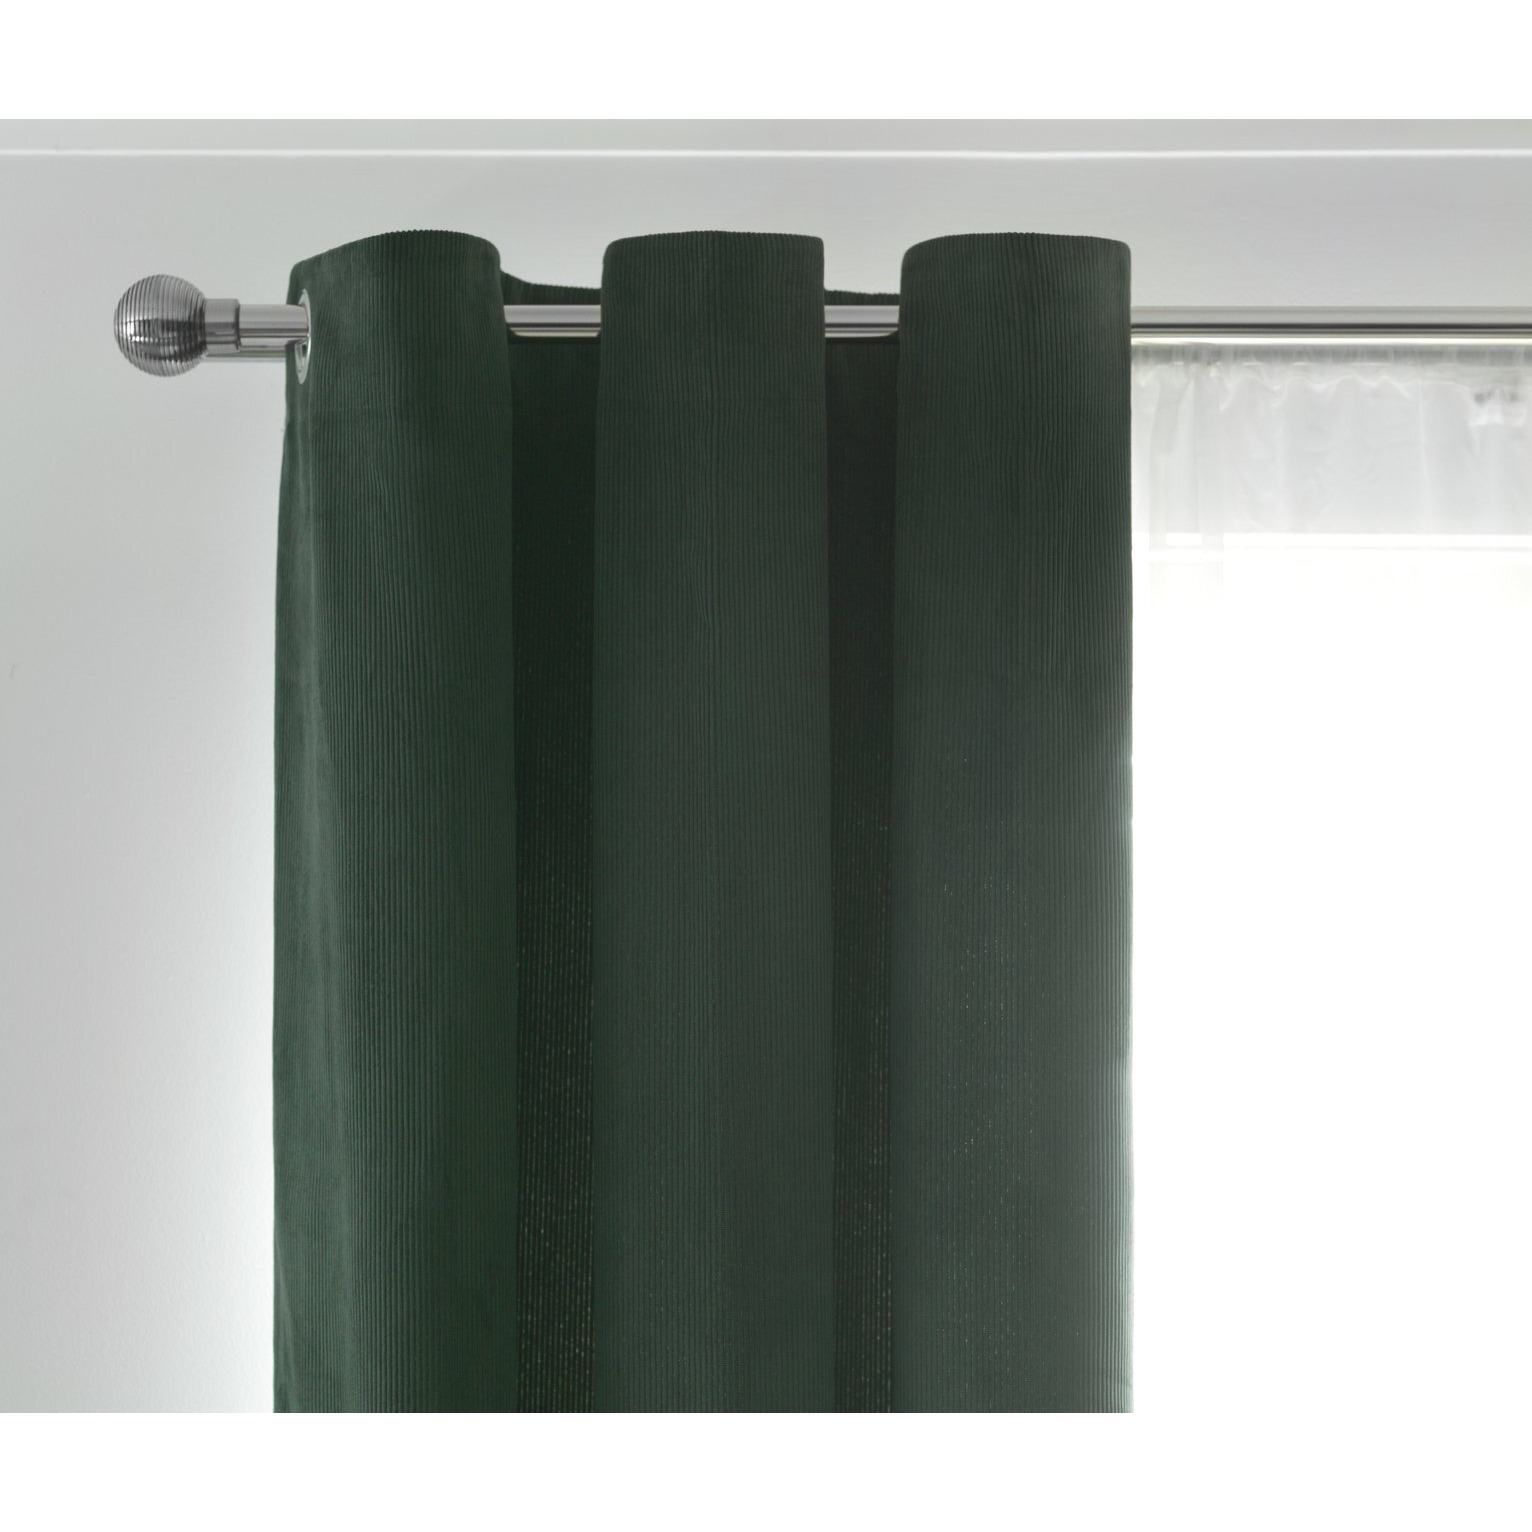 Habitat Cord Lined Eyelet Curtains -Forest Green - 168x183cm - image 1